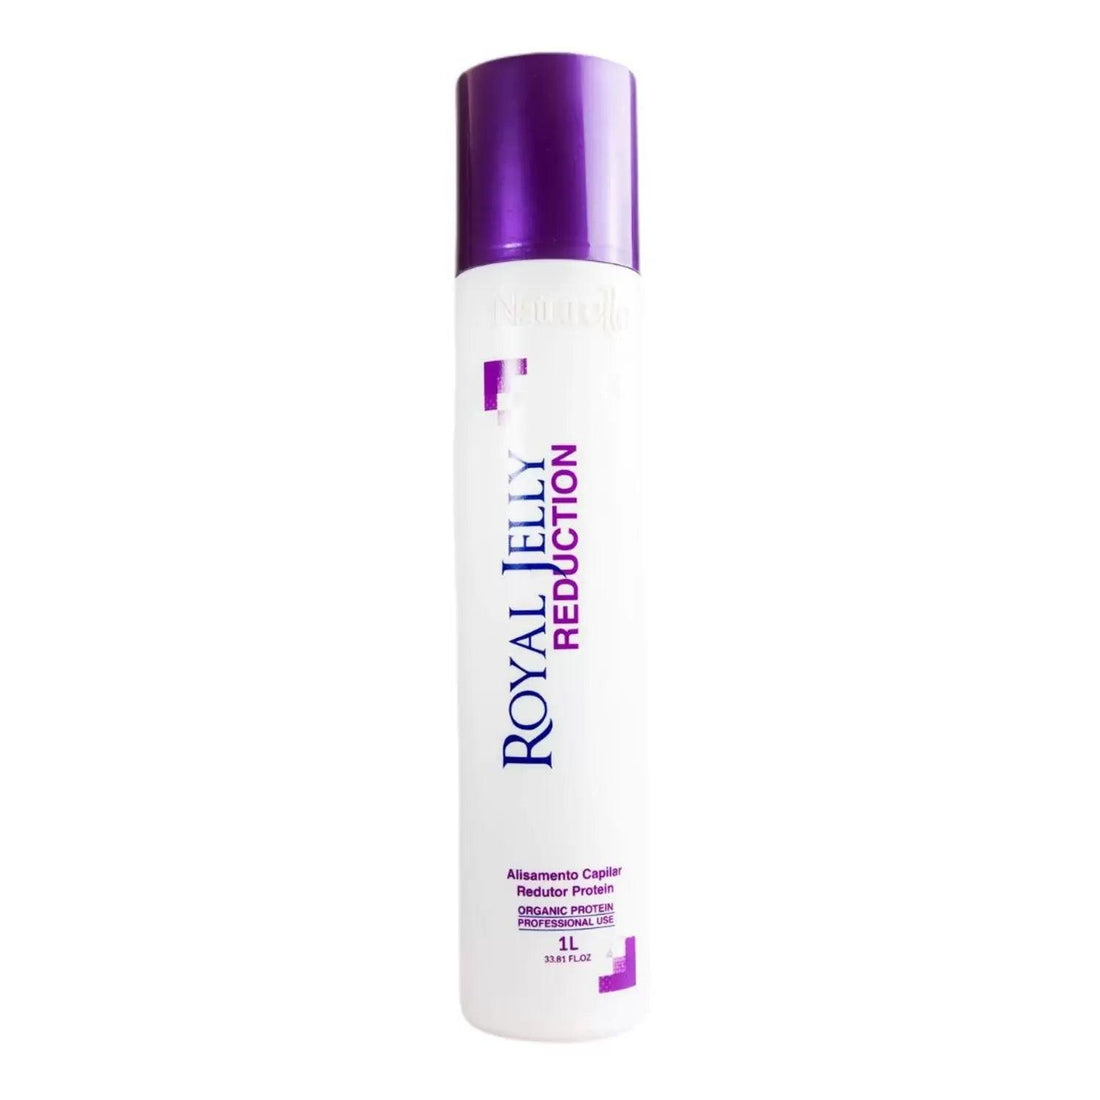 Naturelle, Royal Jelly Reduction, Restoring Conditioner For Hair, 1L - BUY BRAZIL STORE